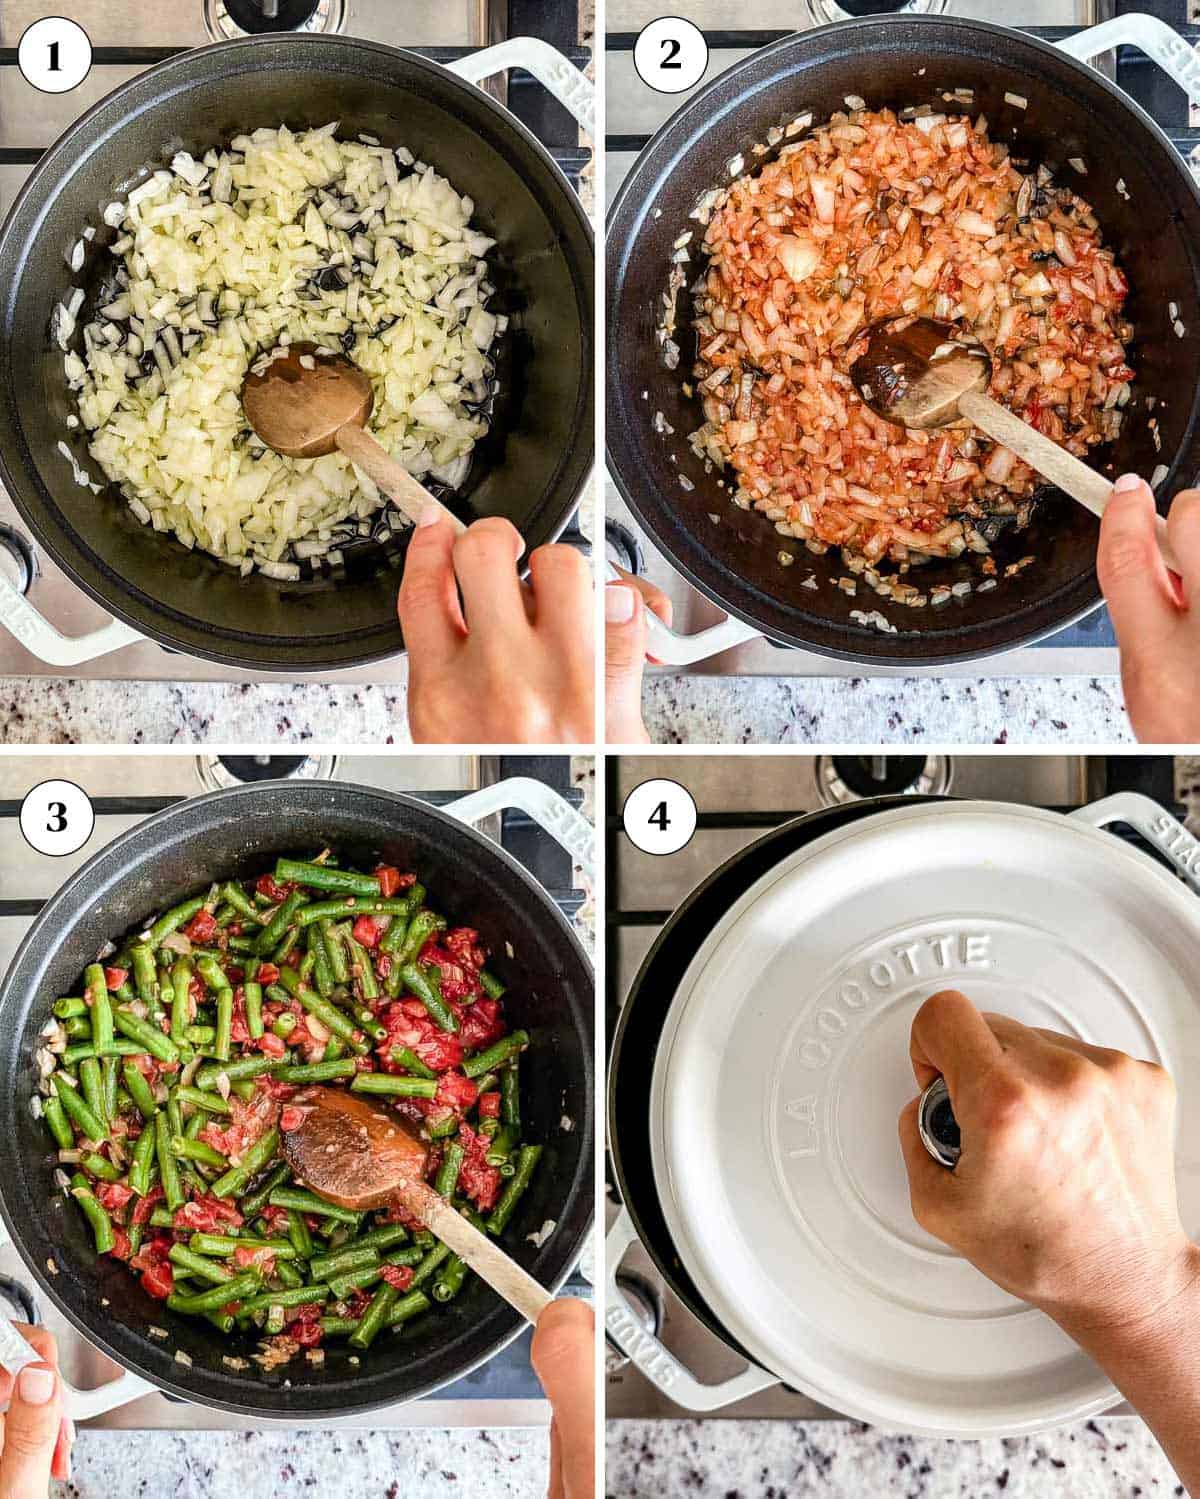 A collage of images showing how to make Turkish style green beans recipe.